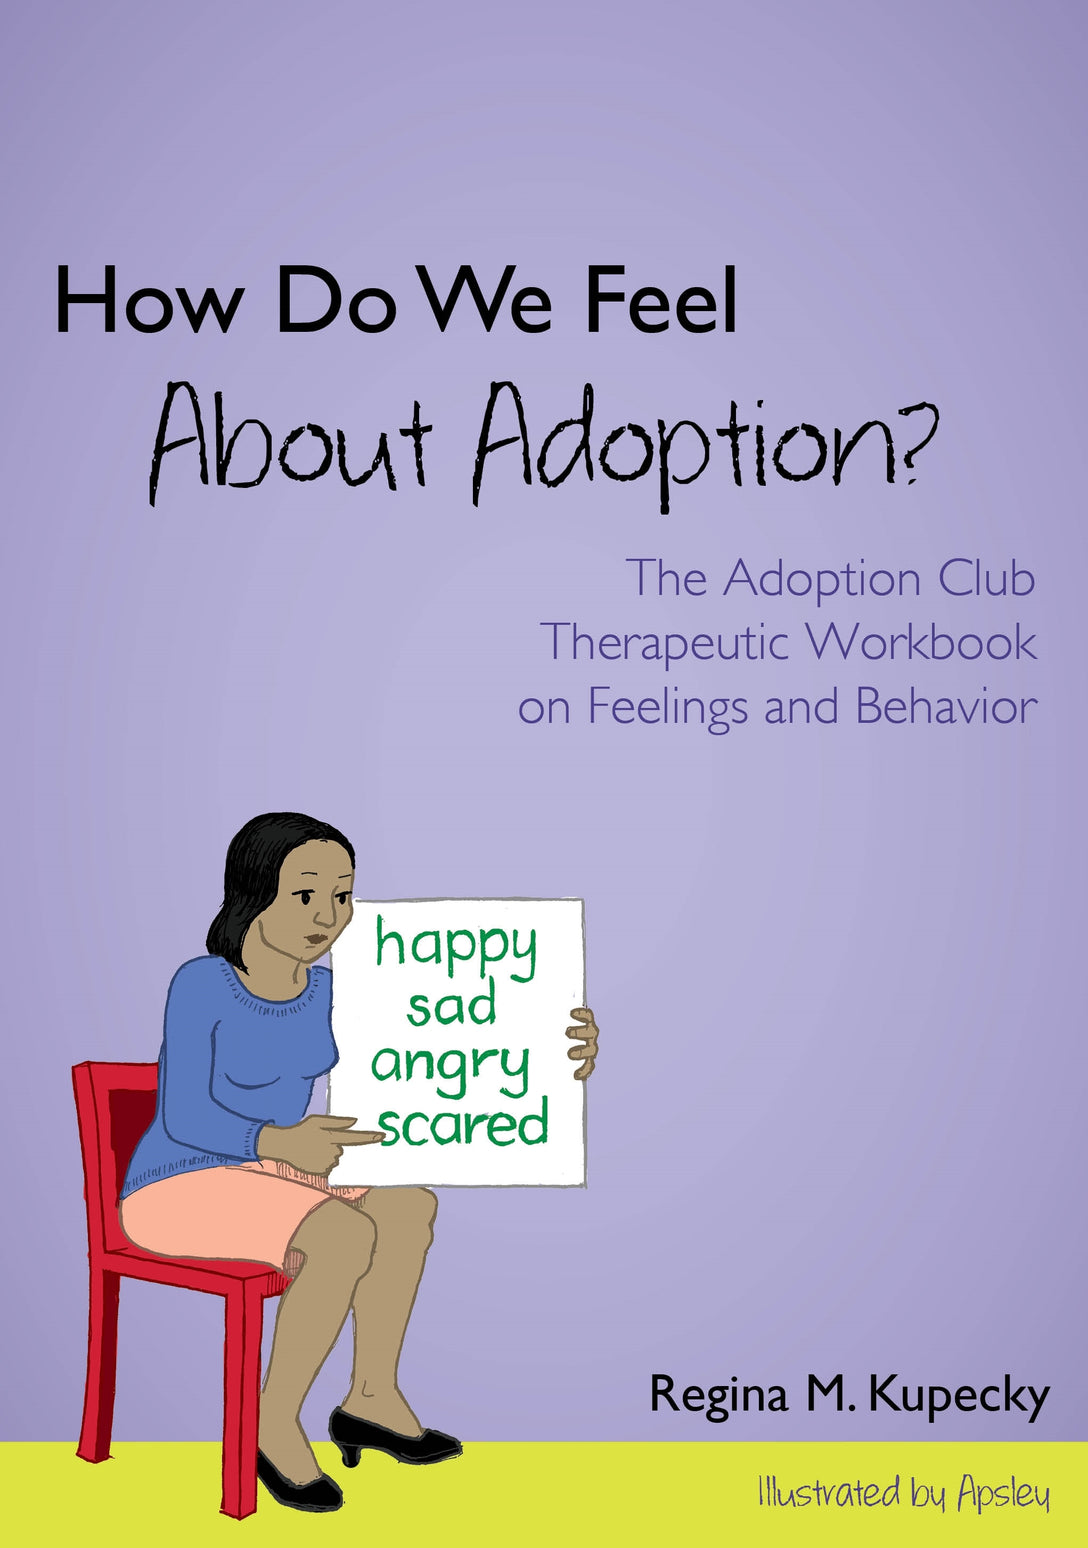 How Do We Feel About Adoption? by Regina M. Kupecky,  Apsley